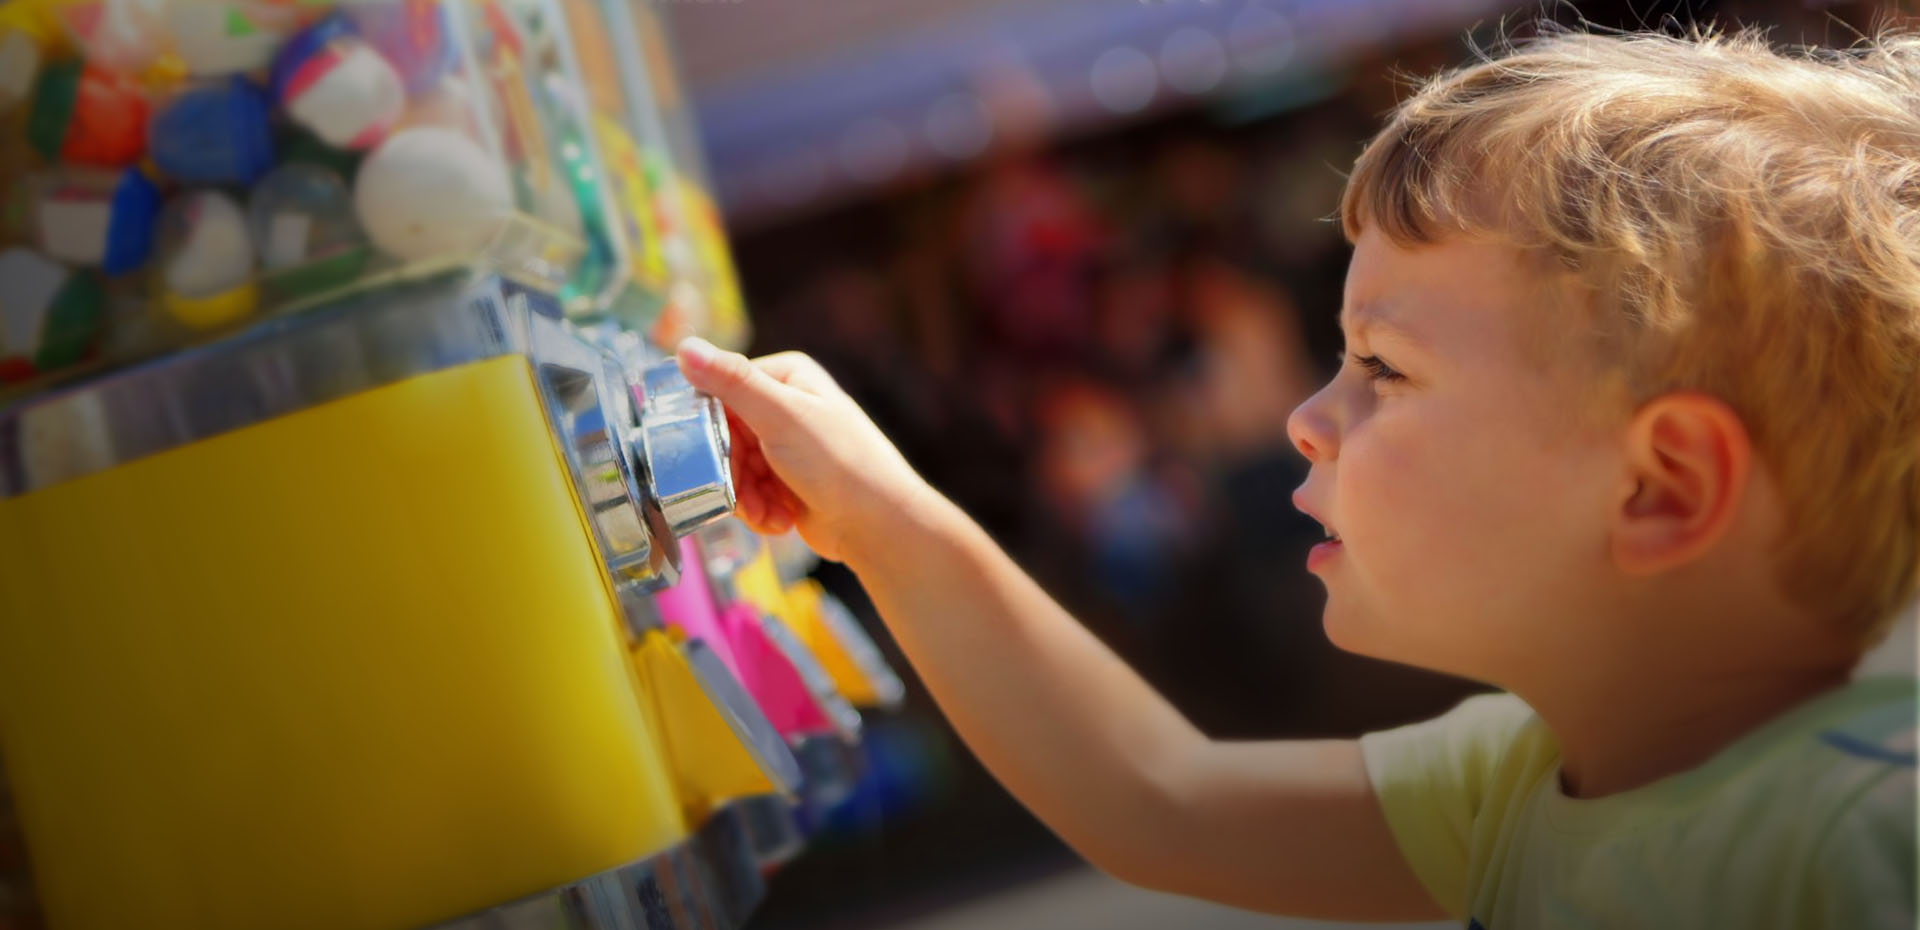 Installers Of Toys Vending Machines For Soft Play Businesses East Midlands